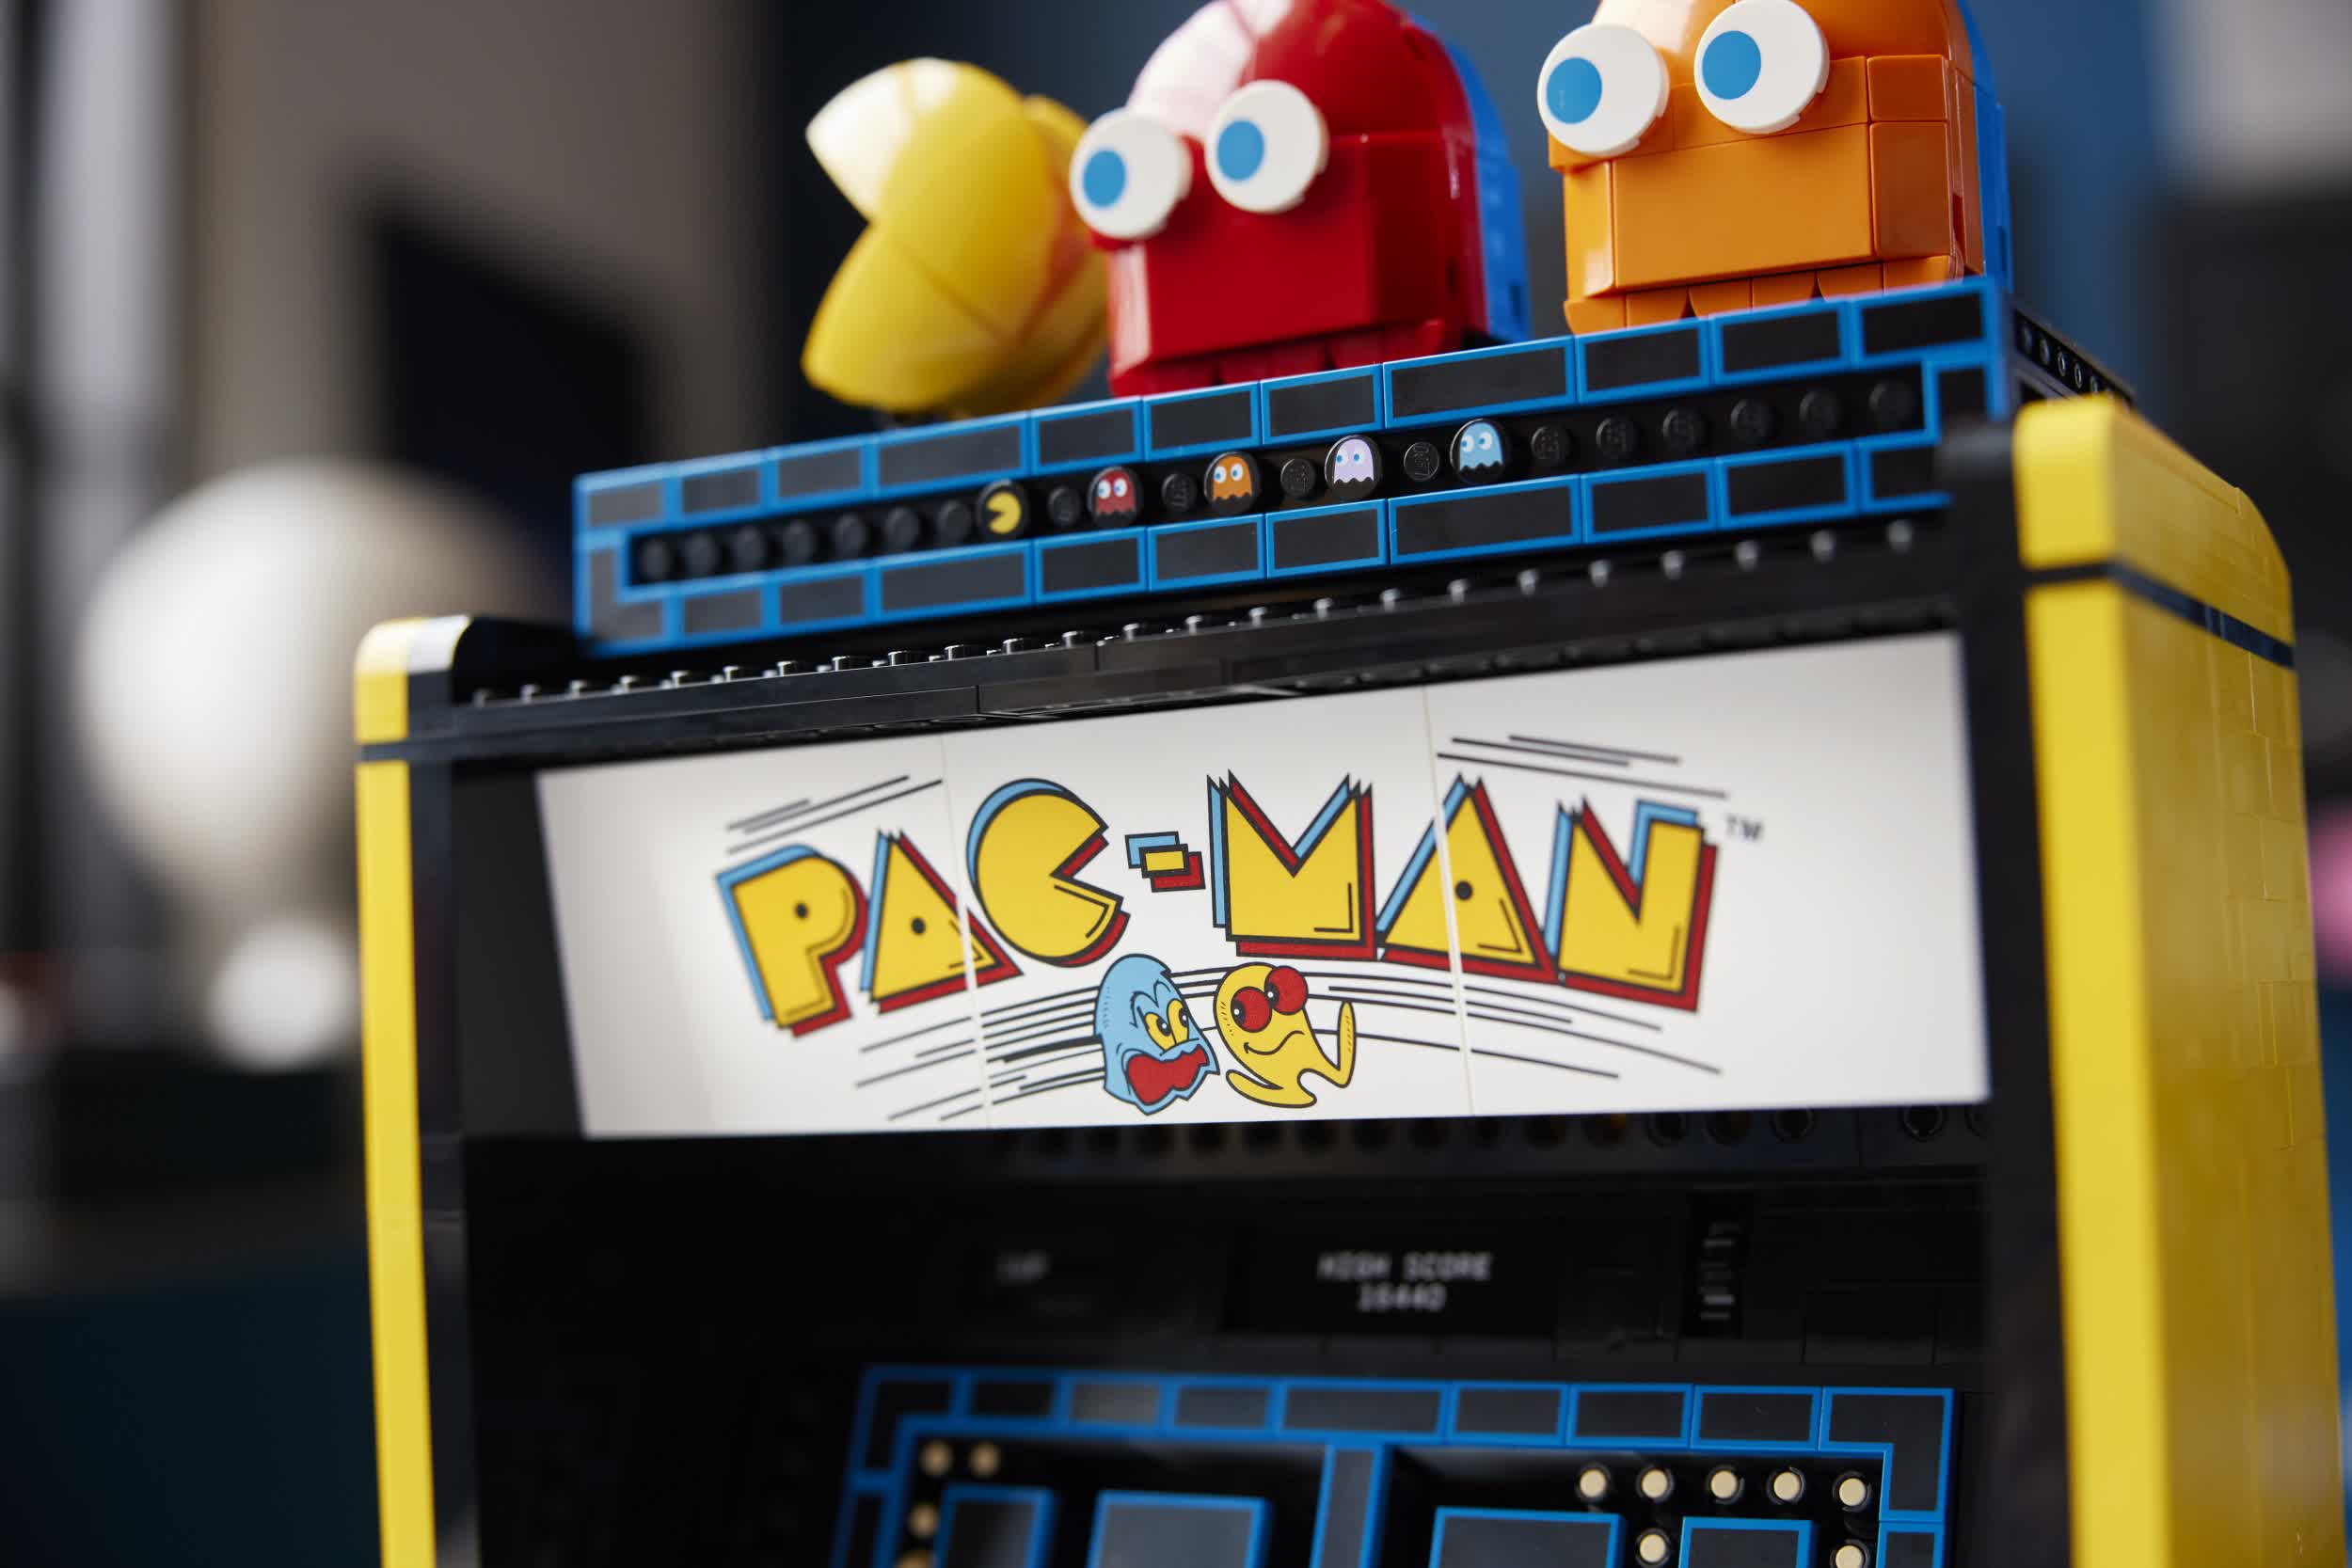 Pixels in motion: Lego's Pac-Man Arcade set comes to life with mechanical crank